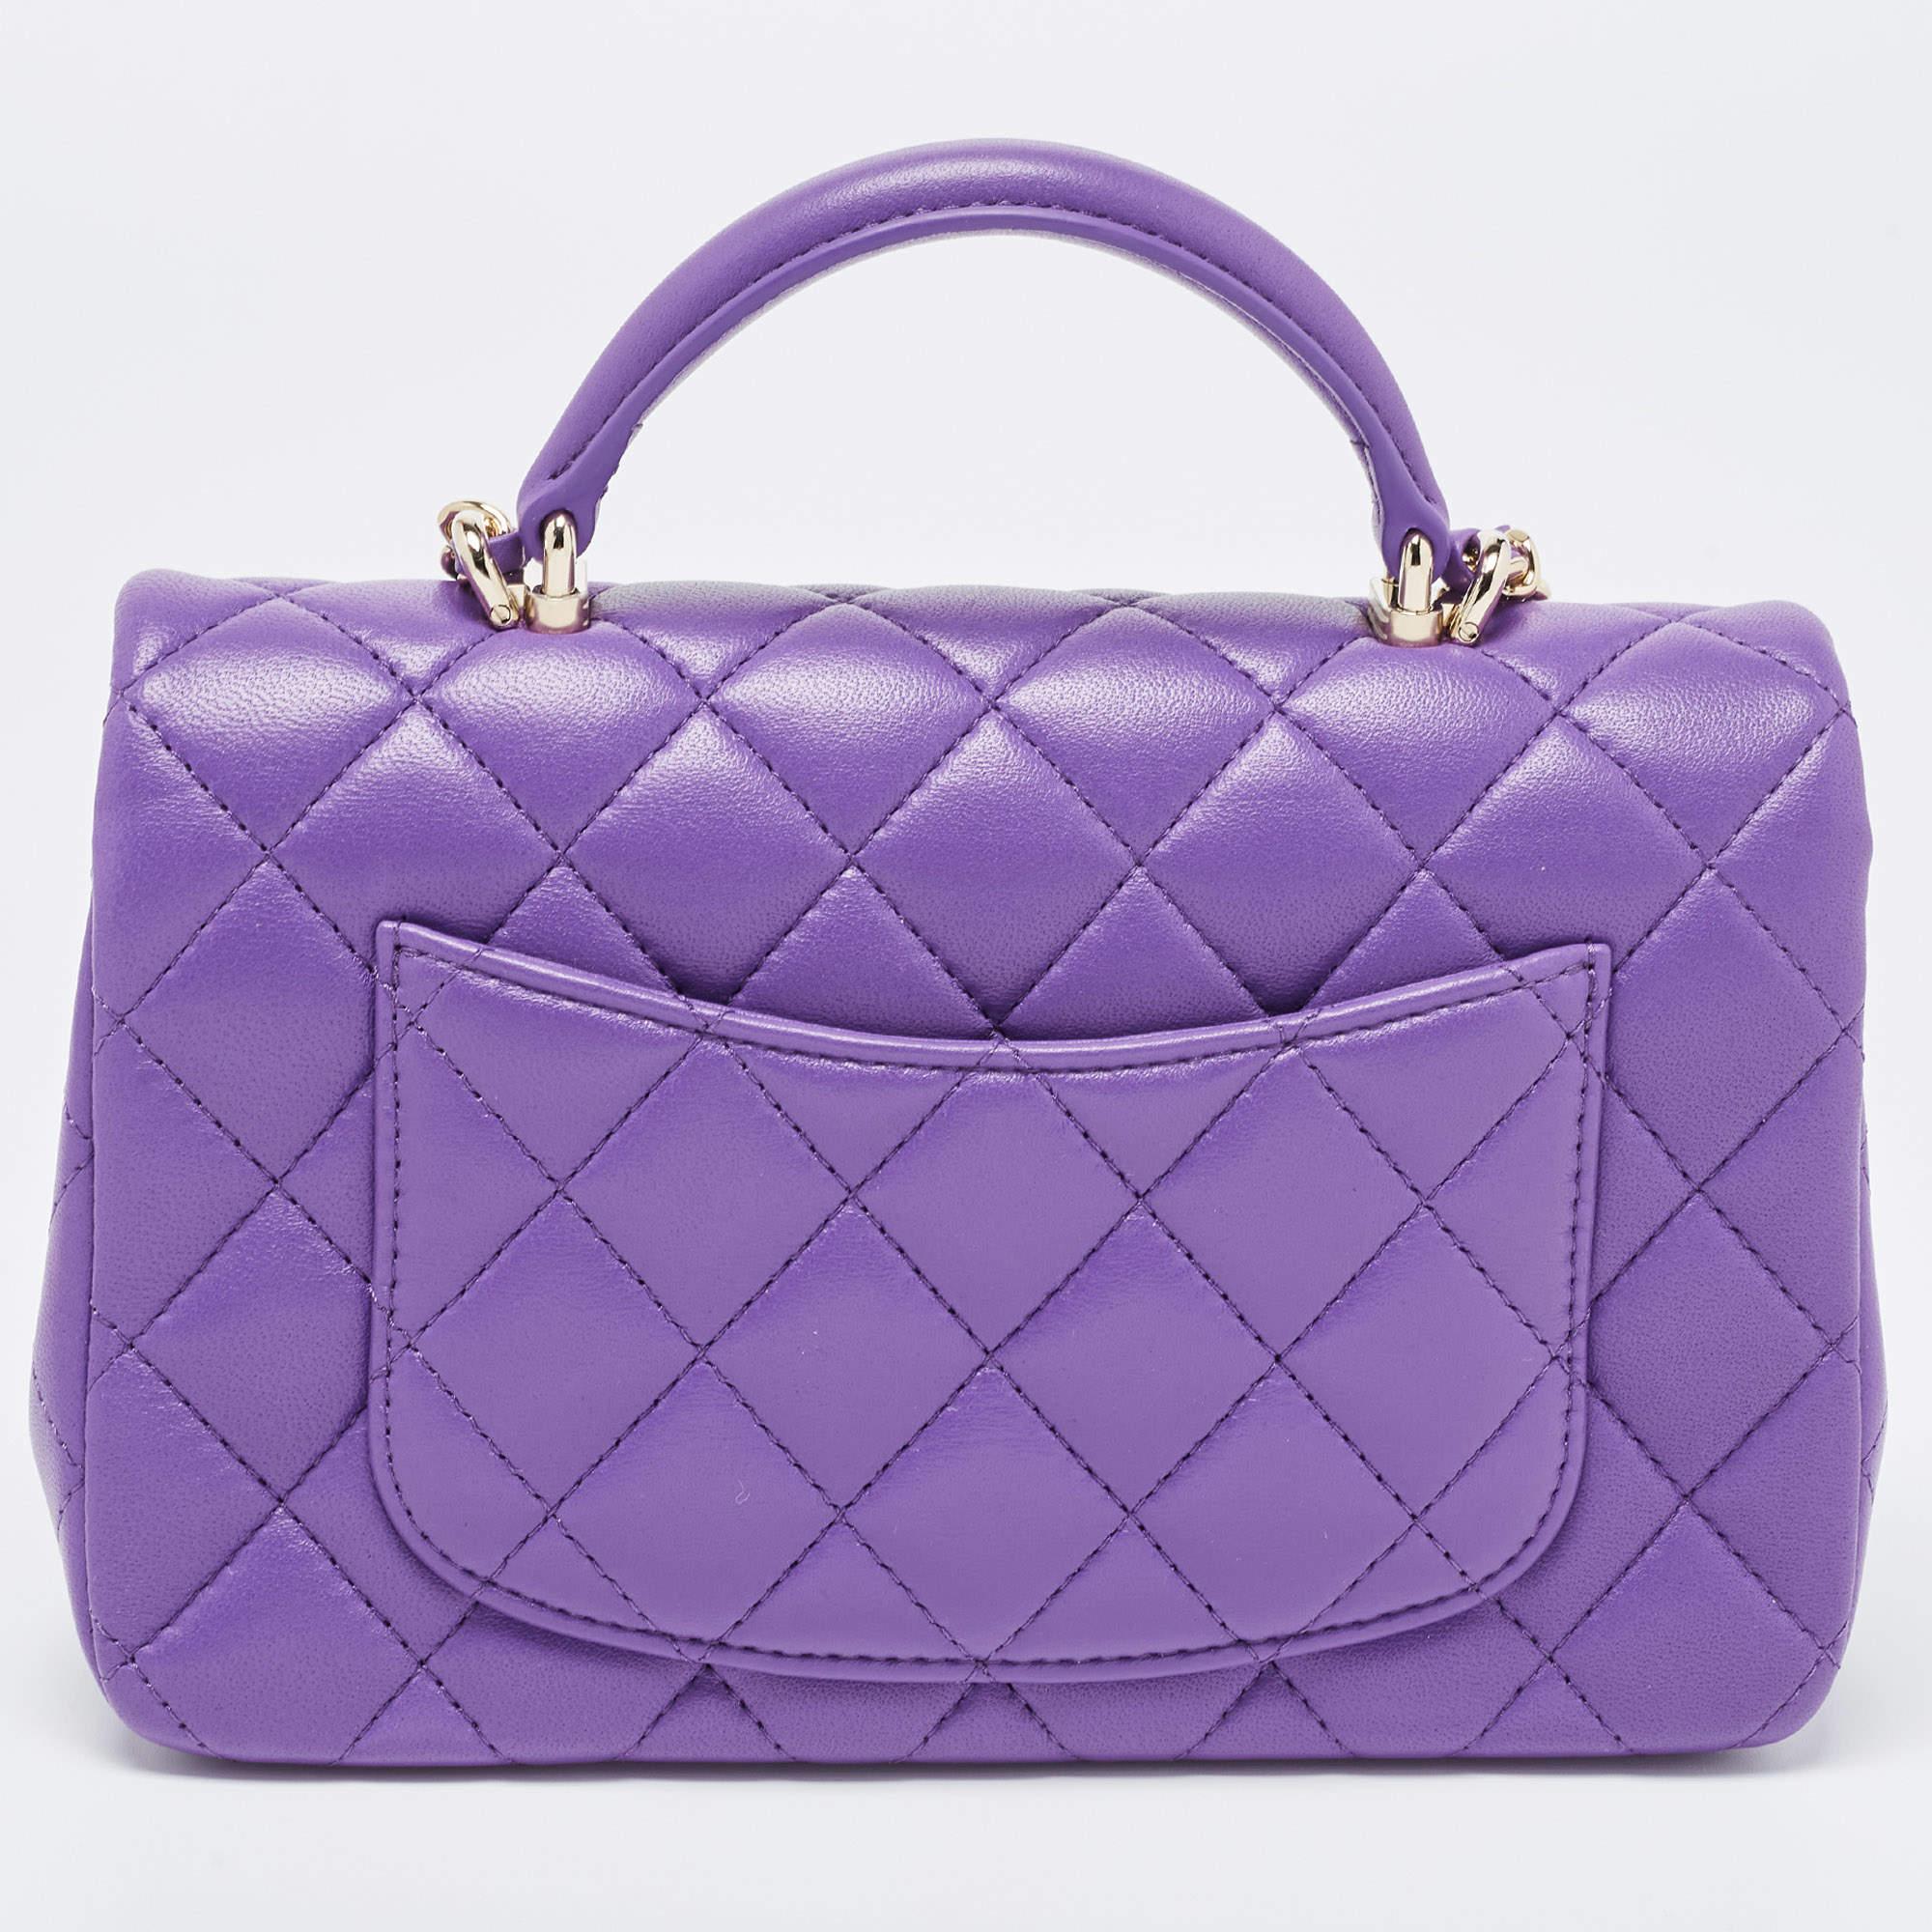 Chanel Purple Quilted Leather Mini Classic Top Handle Bag 4